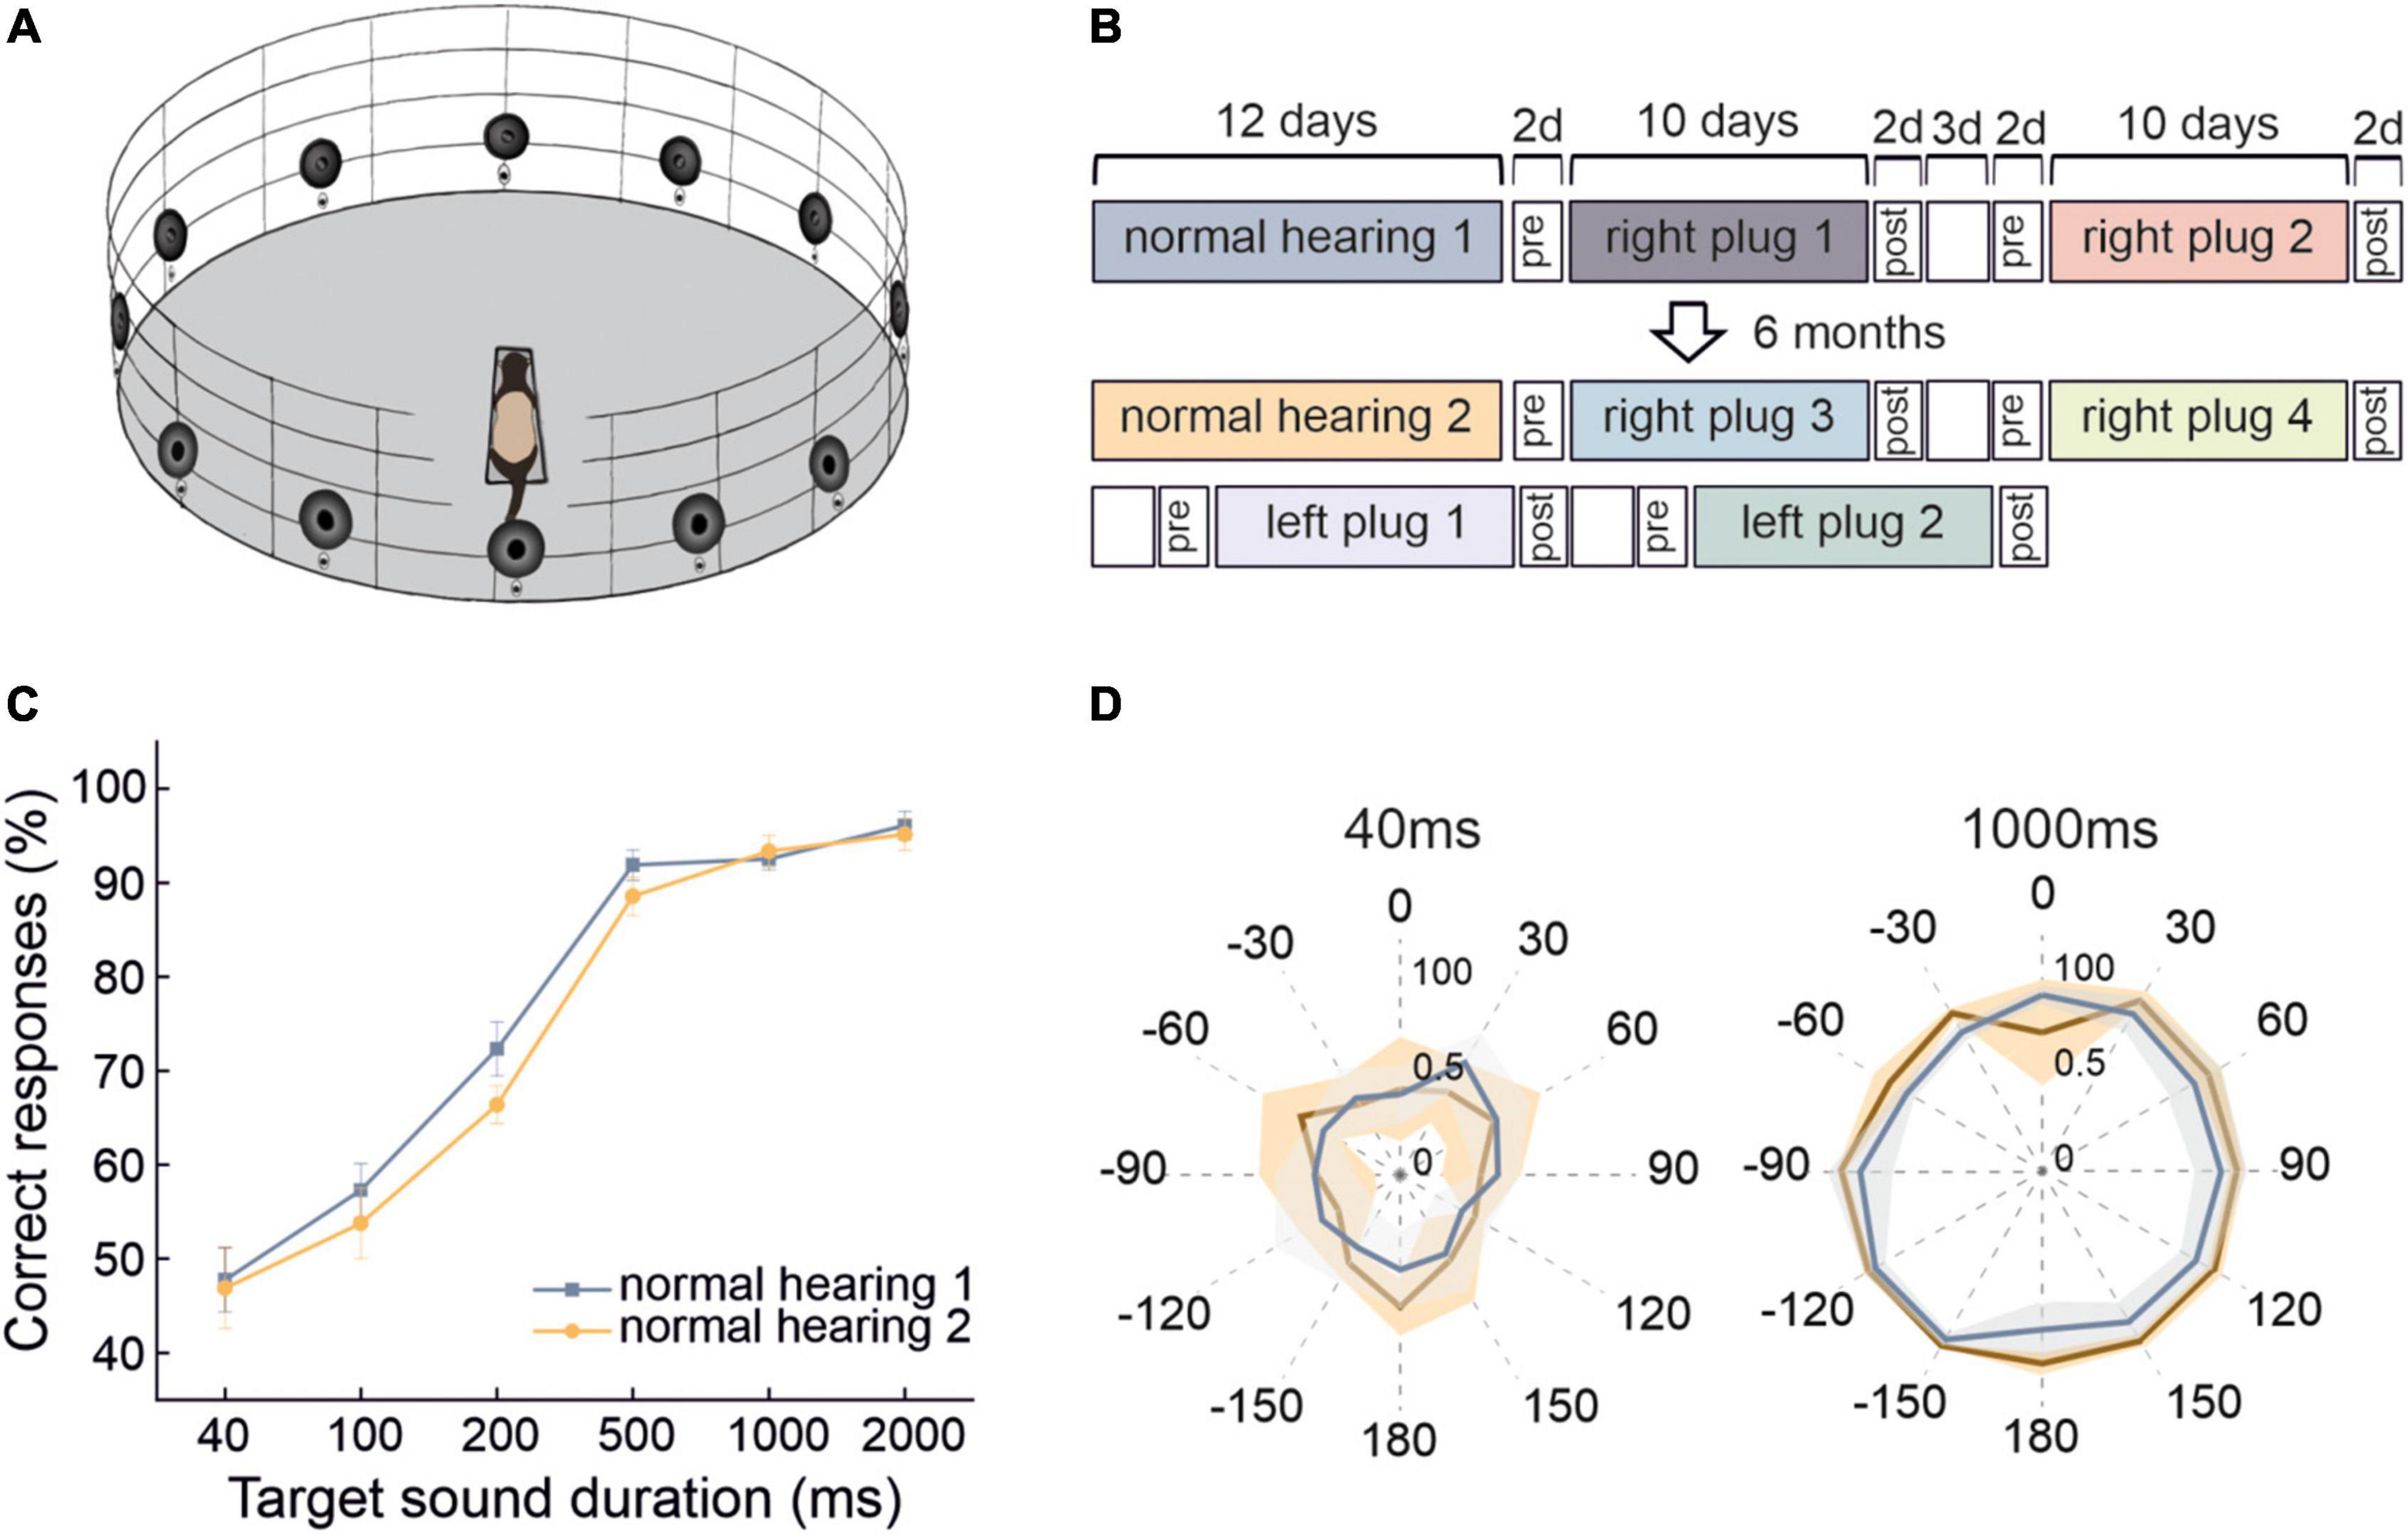 Persistence and generalization of adaptive changes in auditory localization behavior following unilateral conductive hearing loss